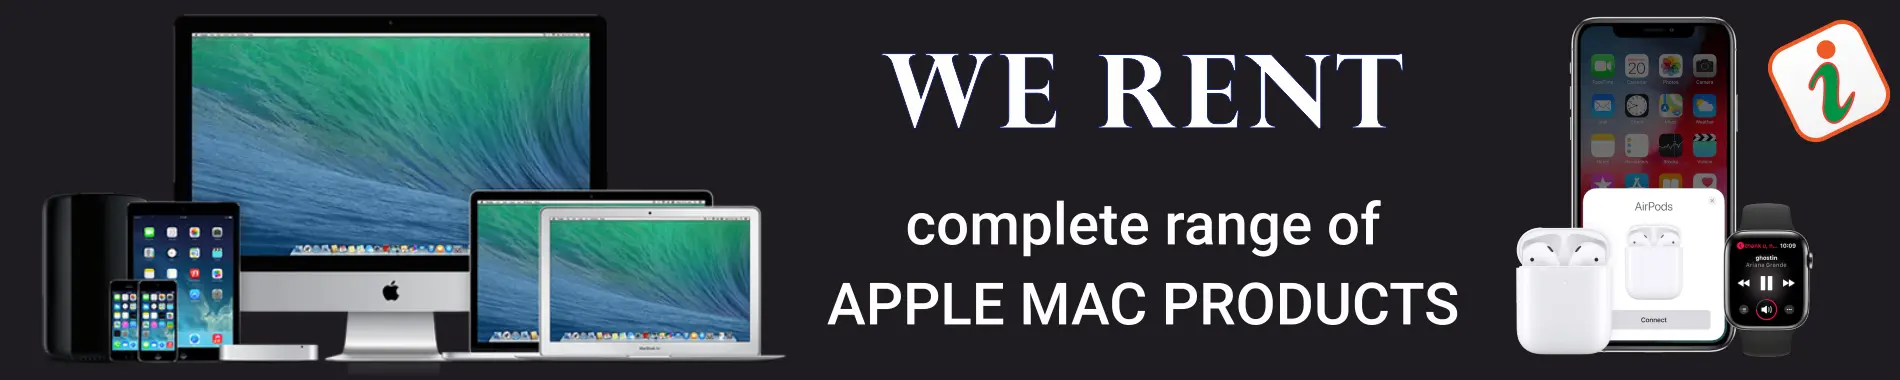 Apple Mac Products on Rent